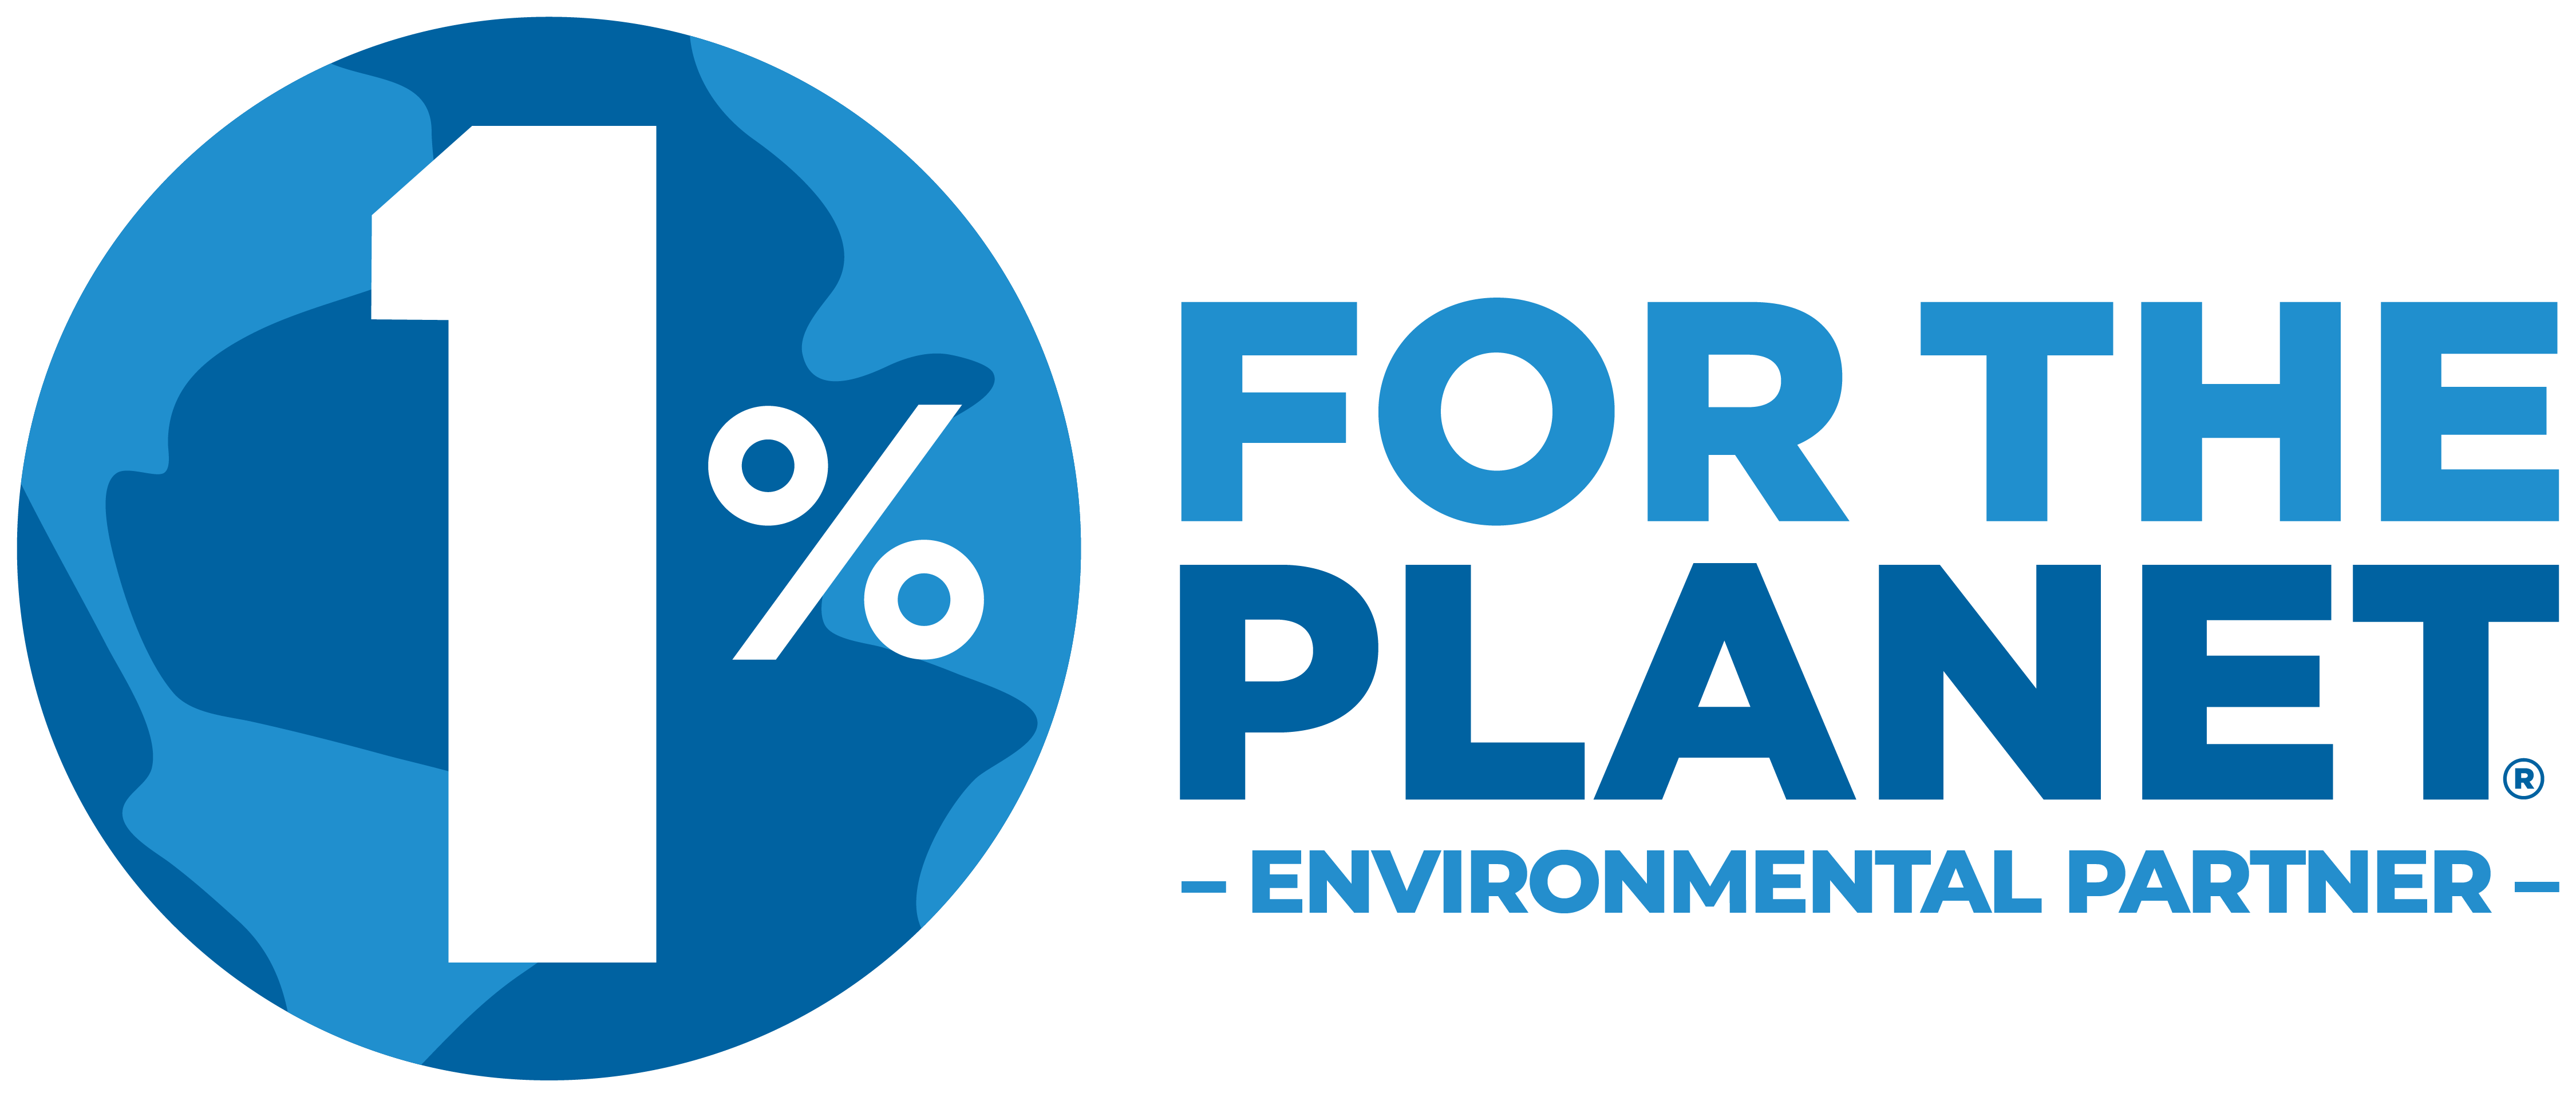 1% For The Planet Partner Badge